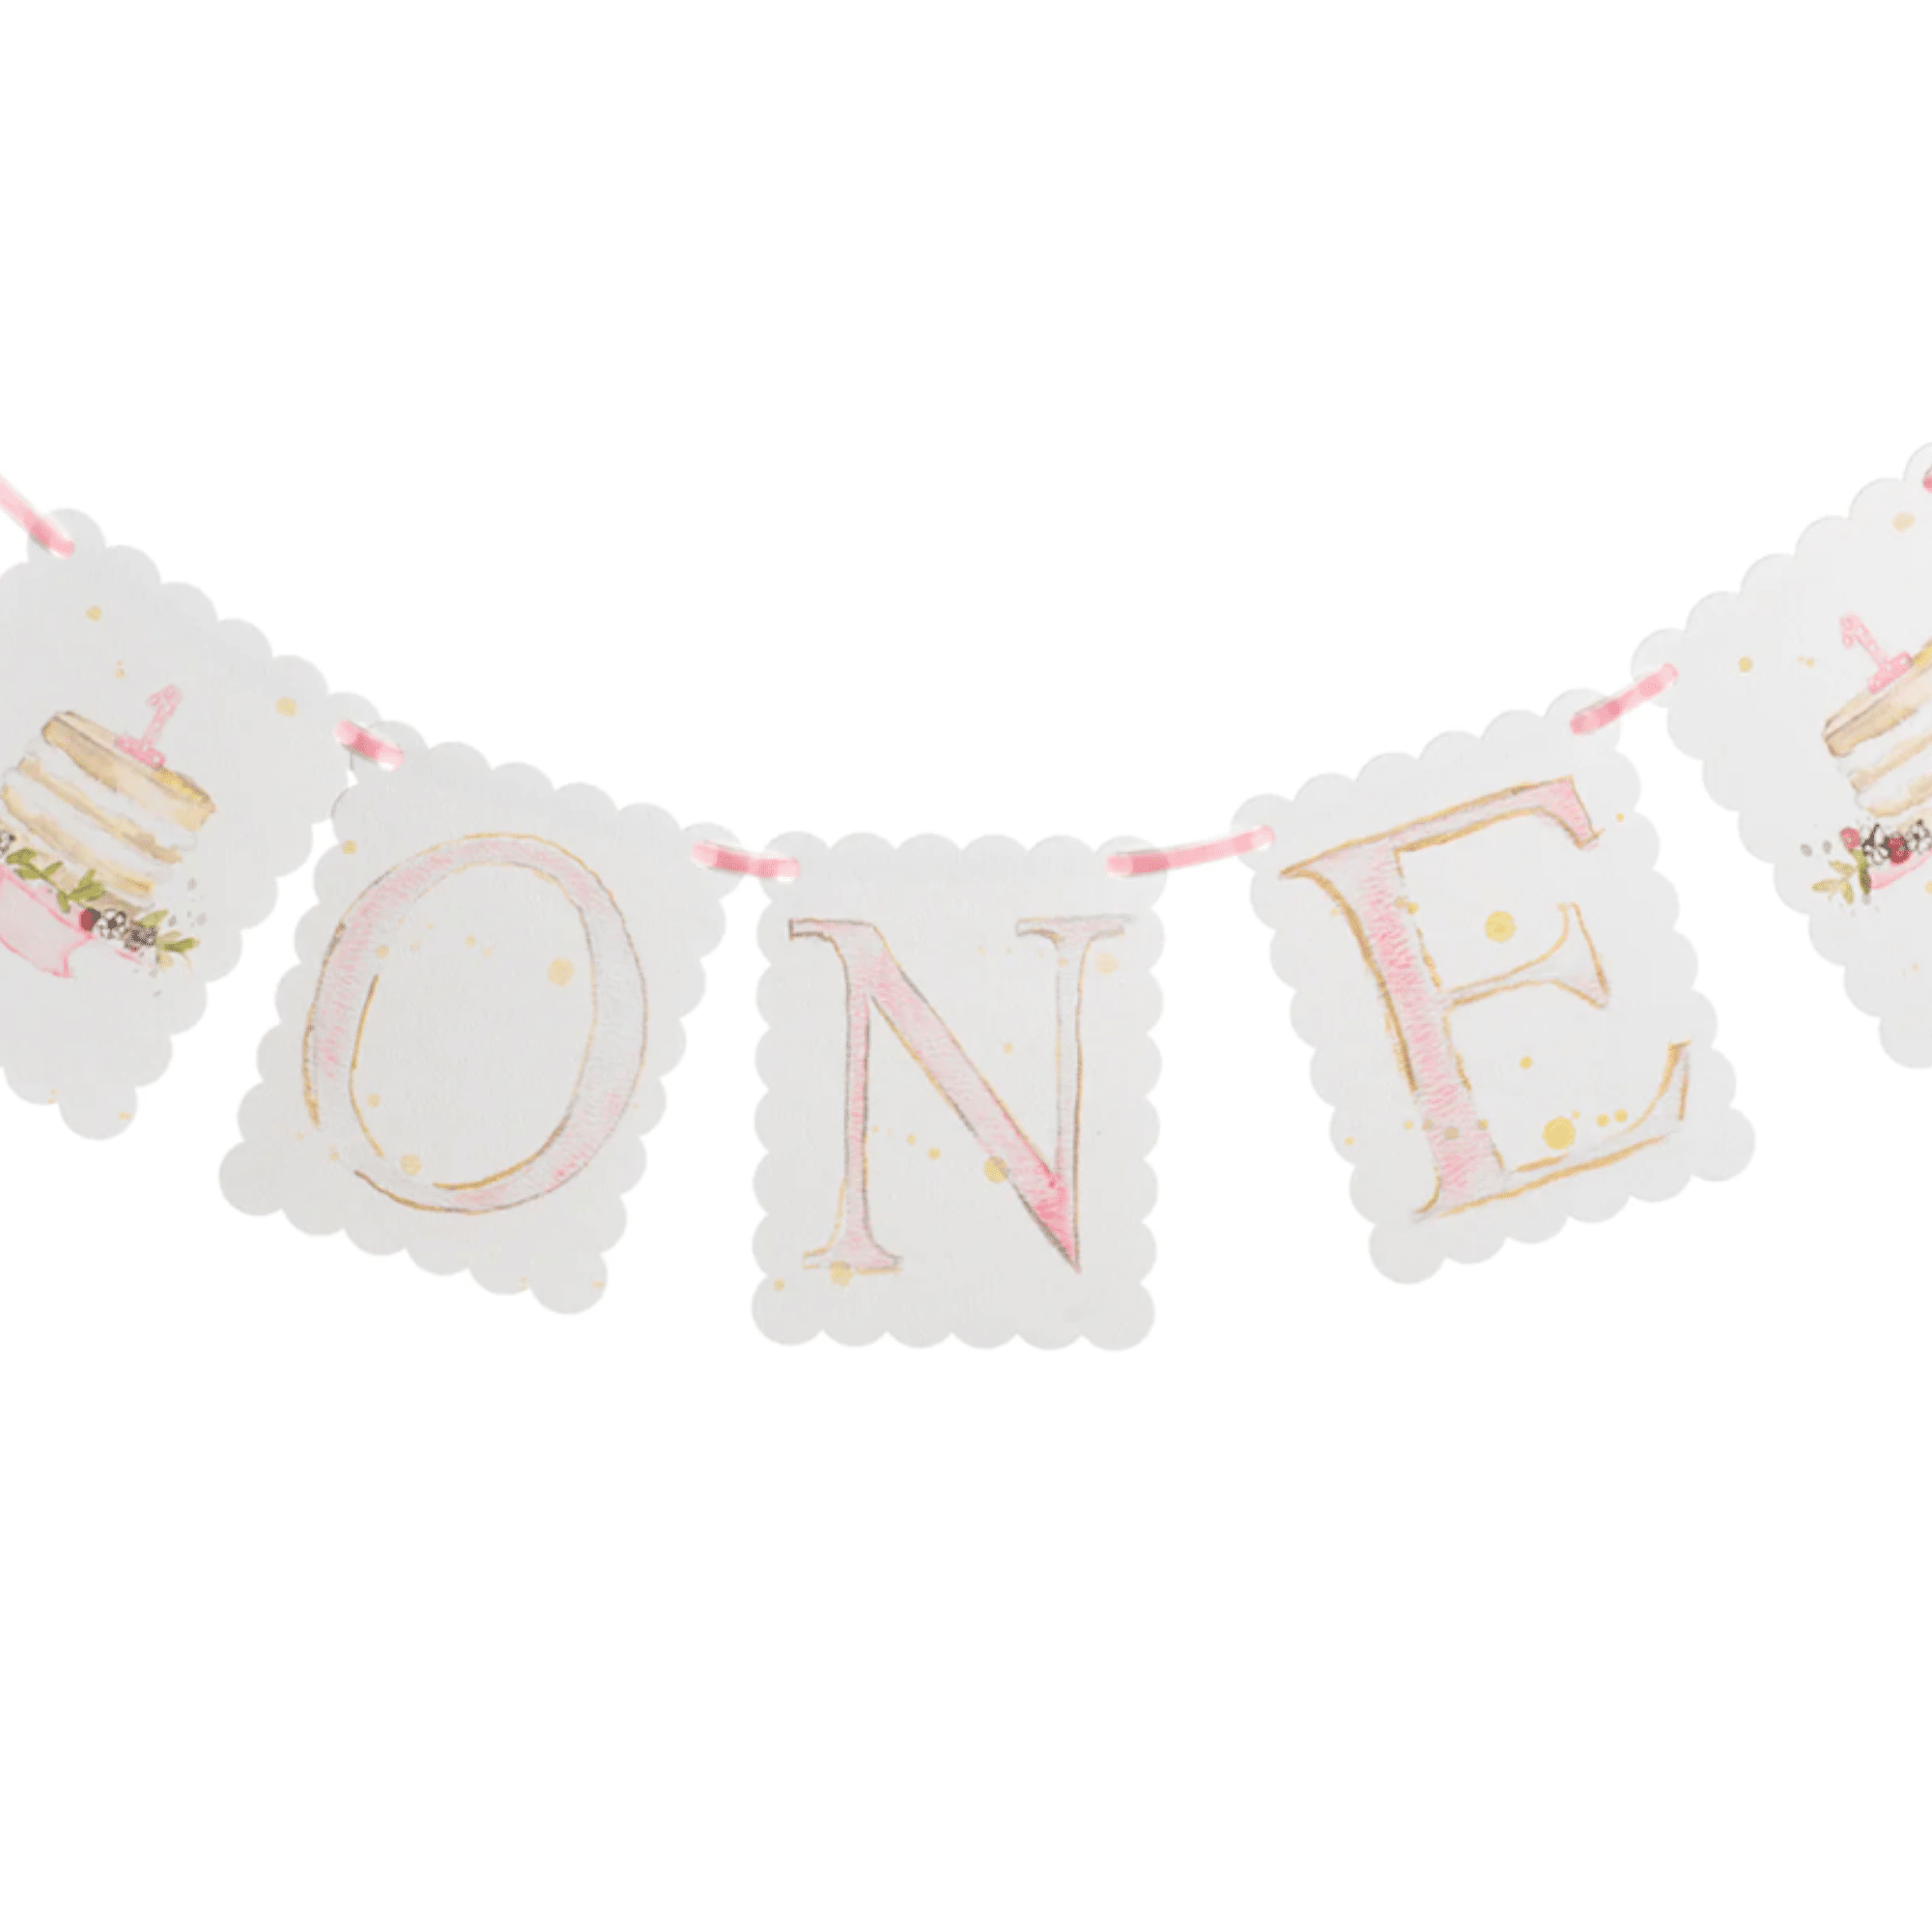 ONE Highchair Banner with Cake End Pieces - Pink1